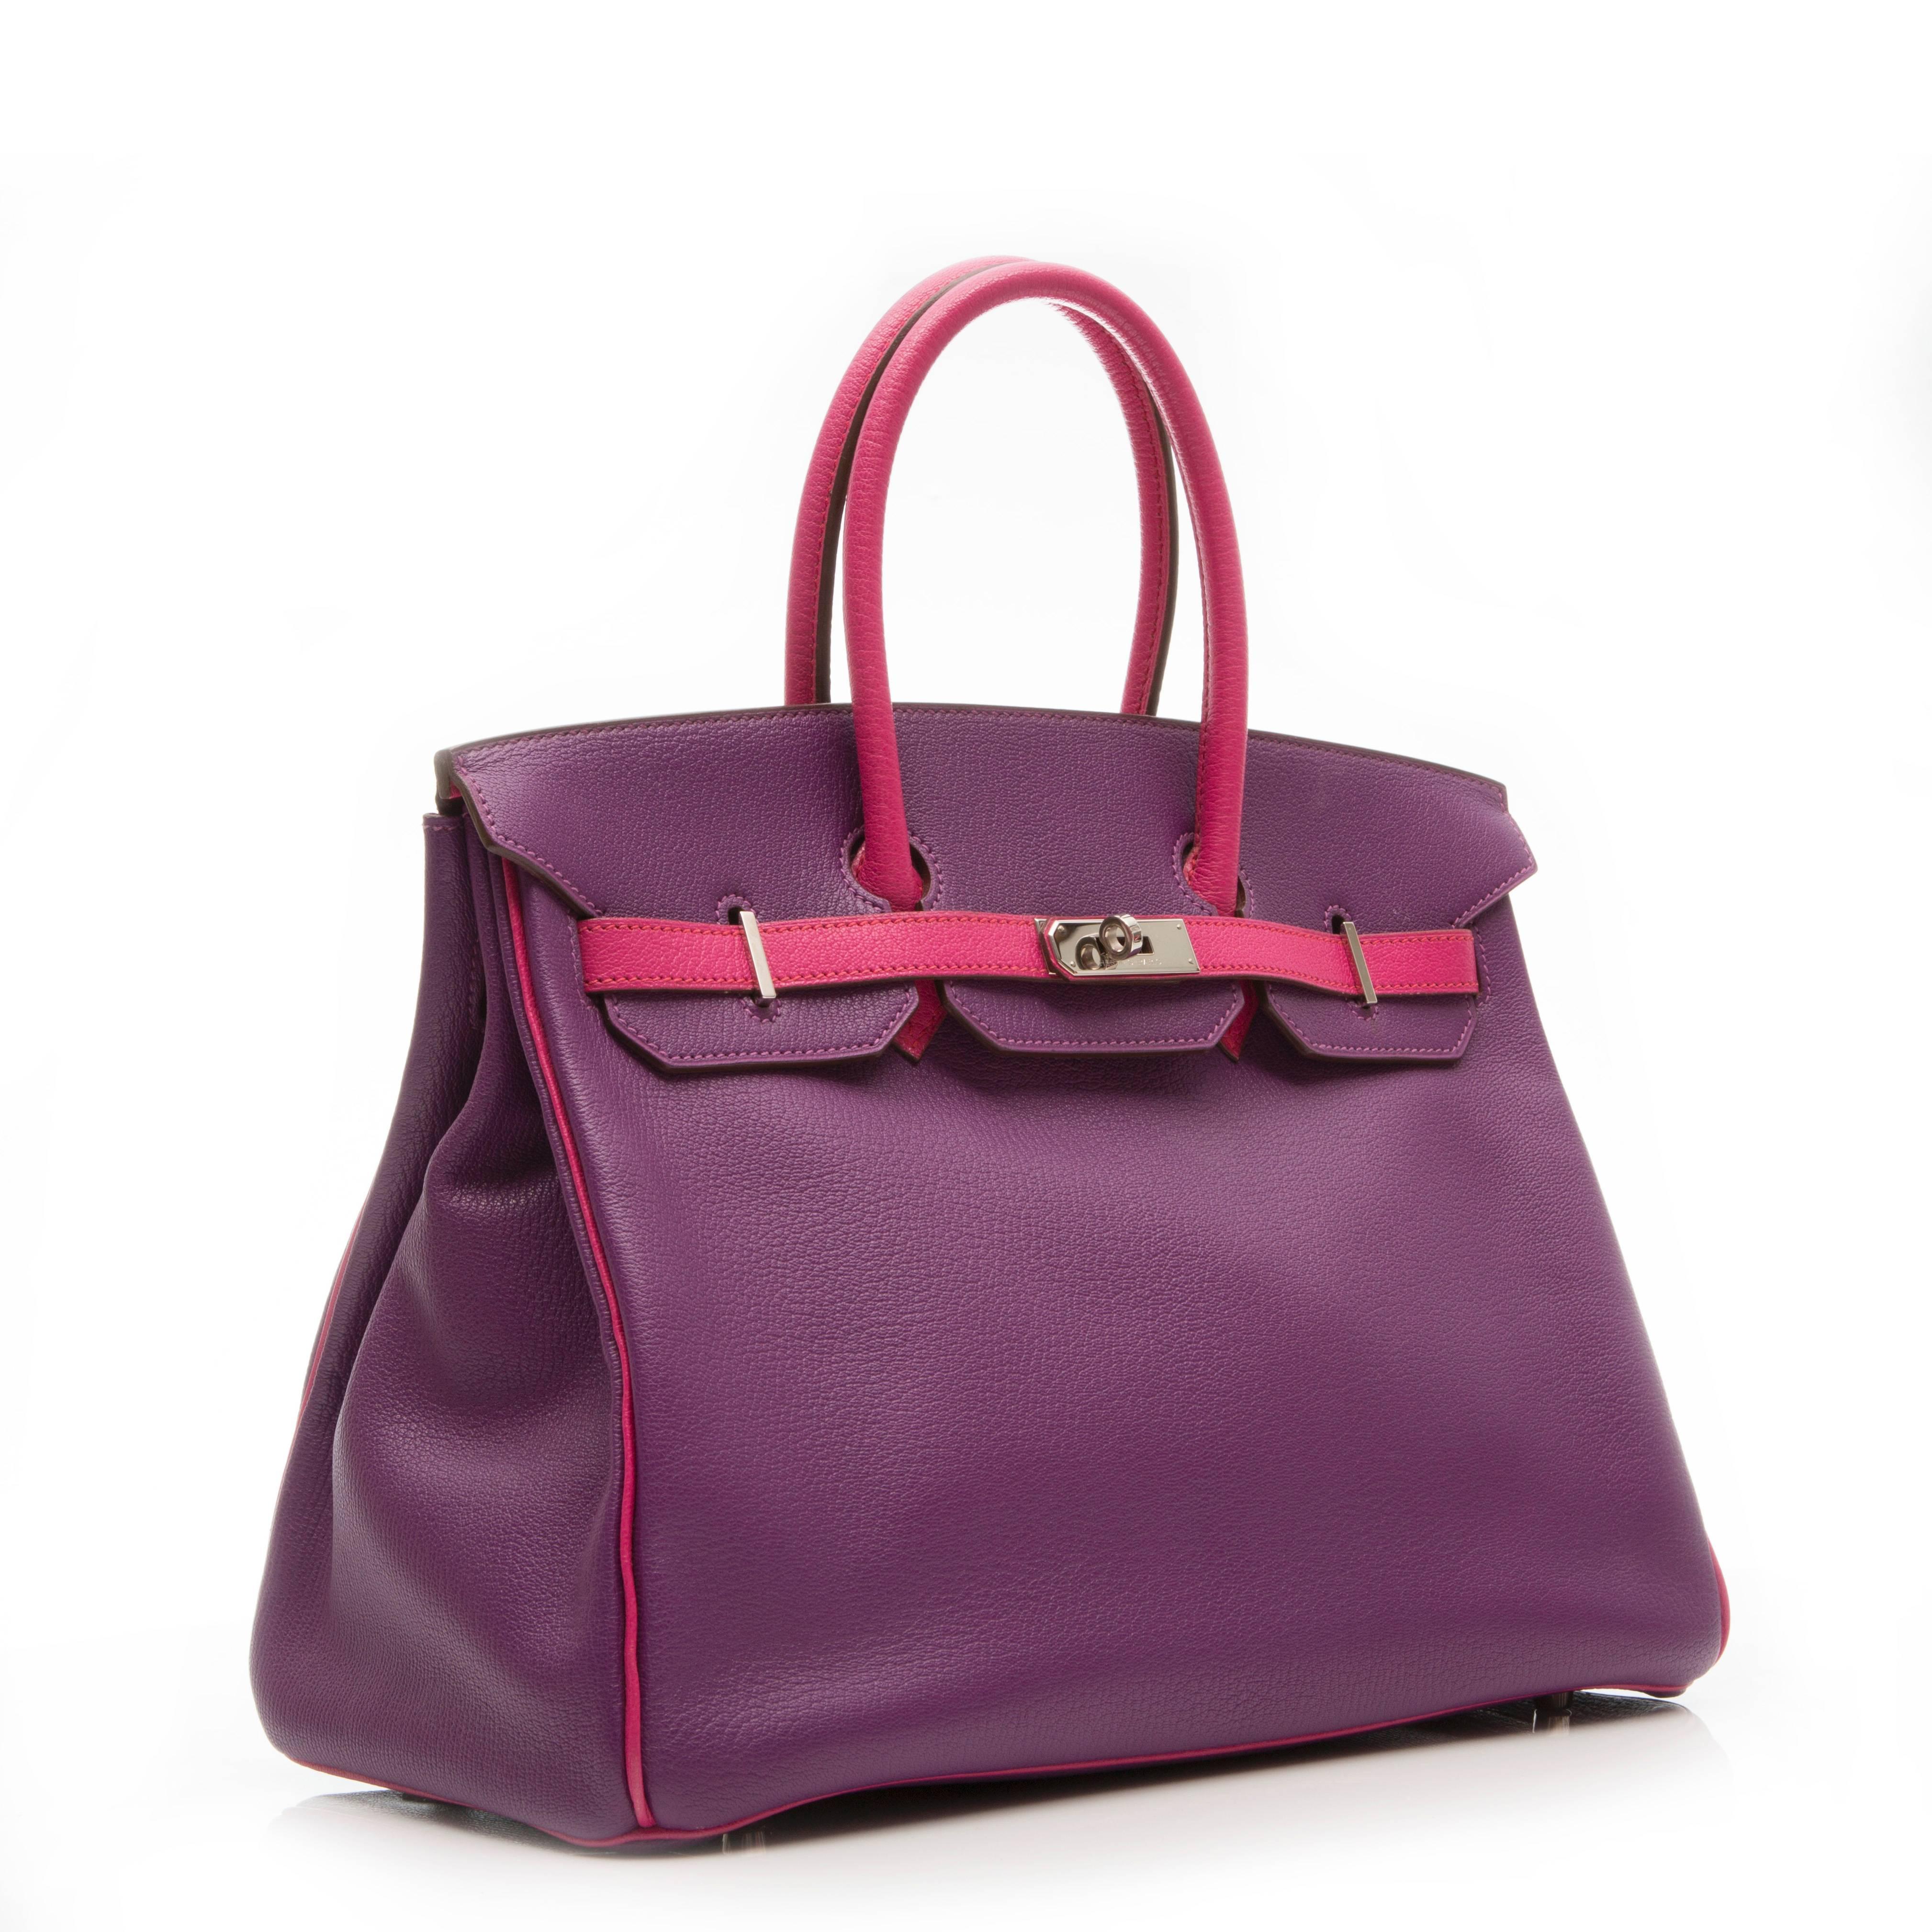 A dazzlingly feminine rendition of the Hermès Birkin handbag. A special order bi-tone of ultra-violet and rose tyrien pink Togo leather are offset with cool, palladium hardware. Togo leather is an incredibly popular Hermès leather for its